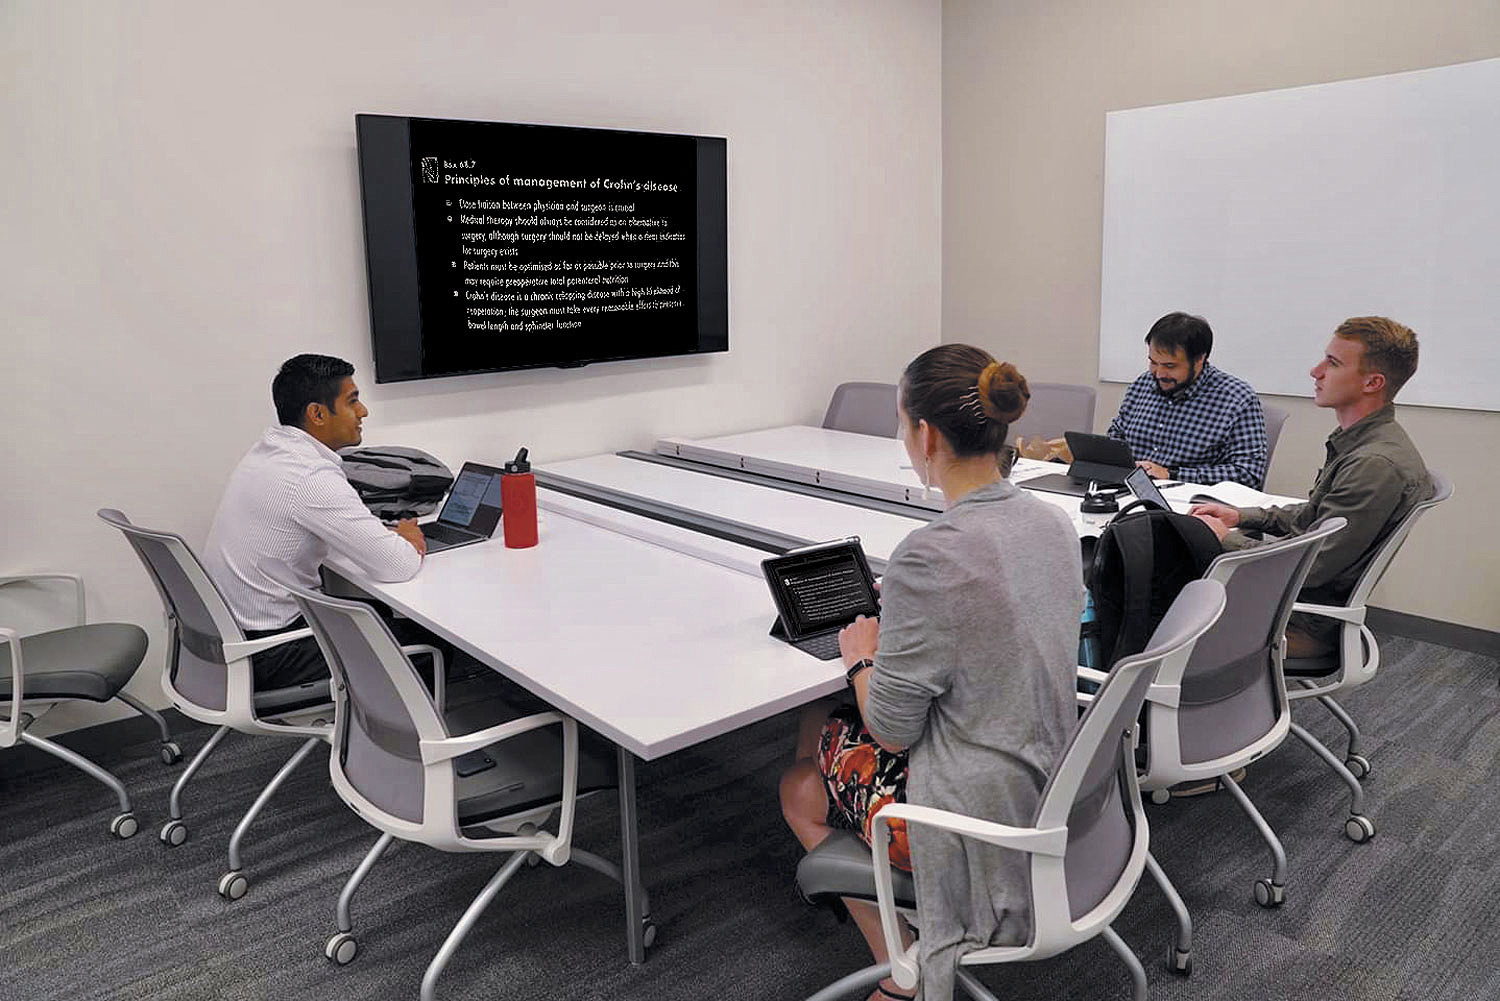 Students have access to the same high-performance technologies when studying in the collaboration rooms as do the faculty within meeting rooms.